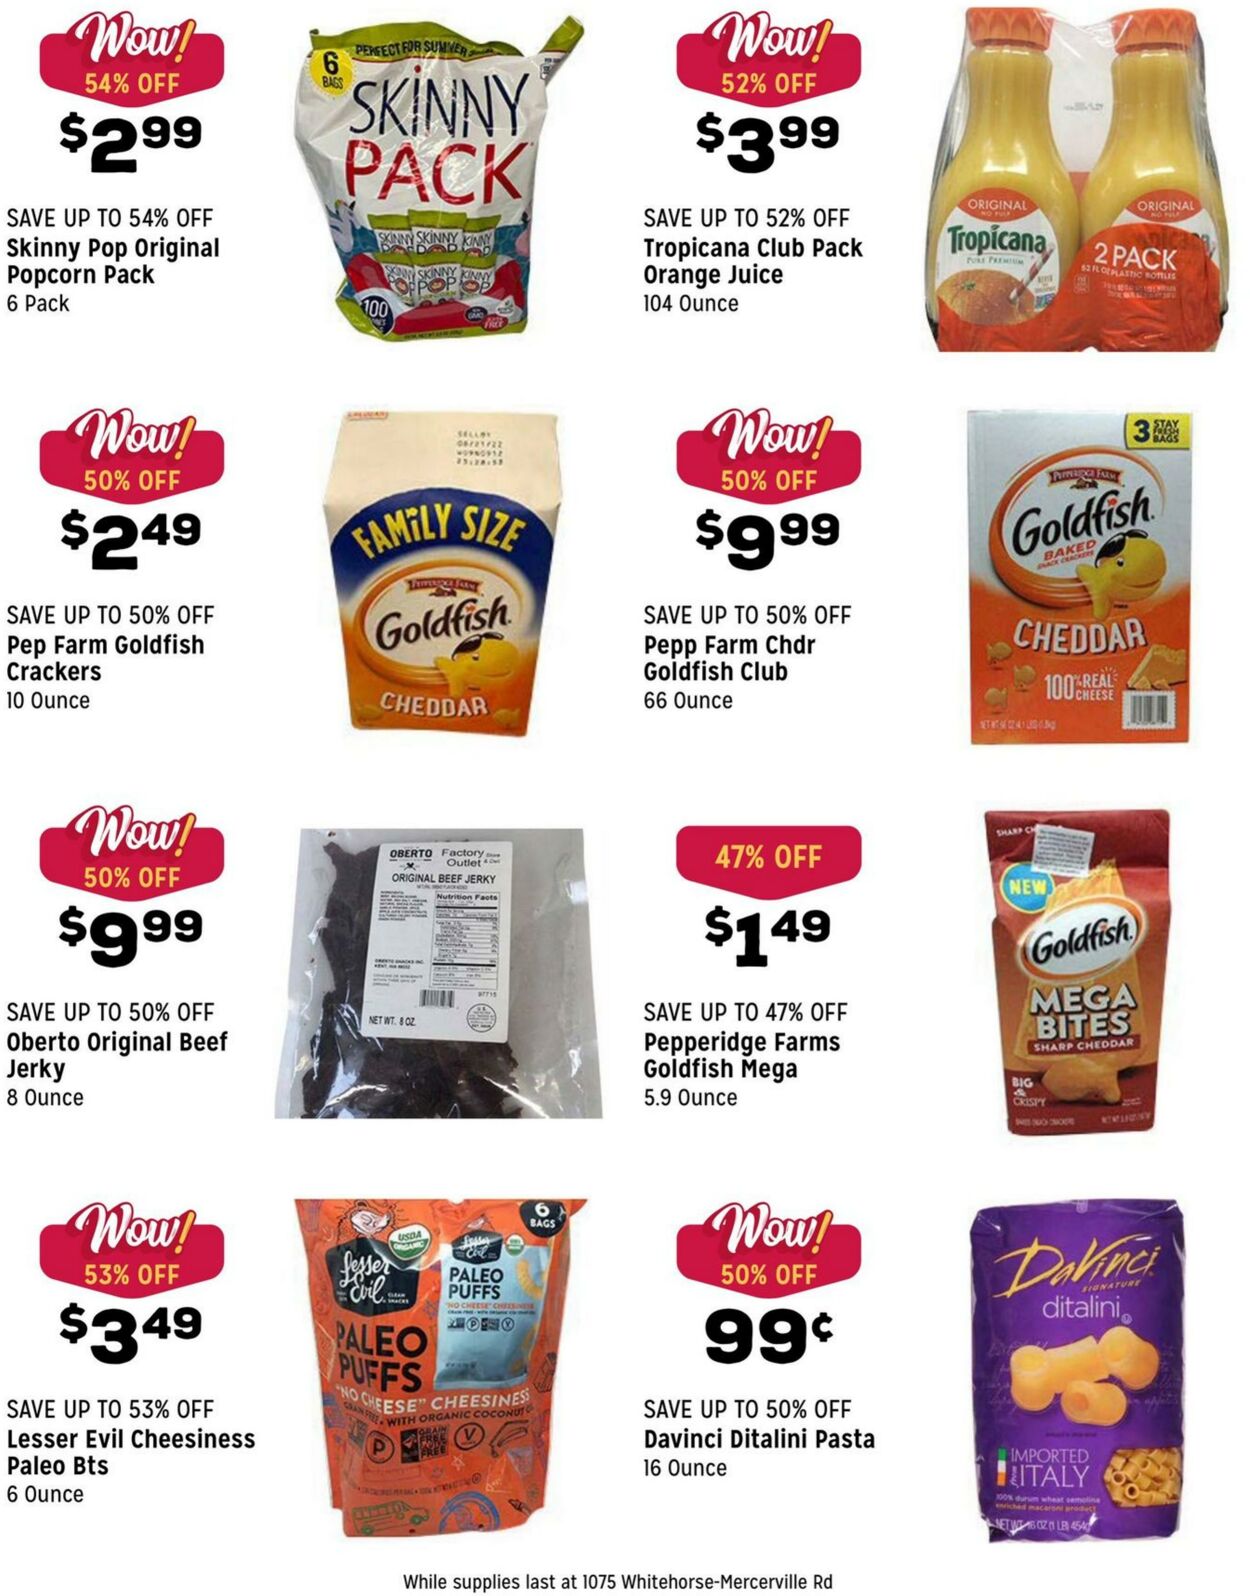 Weekly ad Grocery Outlet 08/03/2022 - 08/09/2022